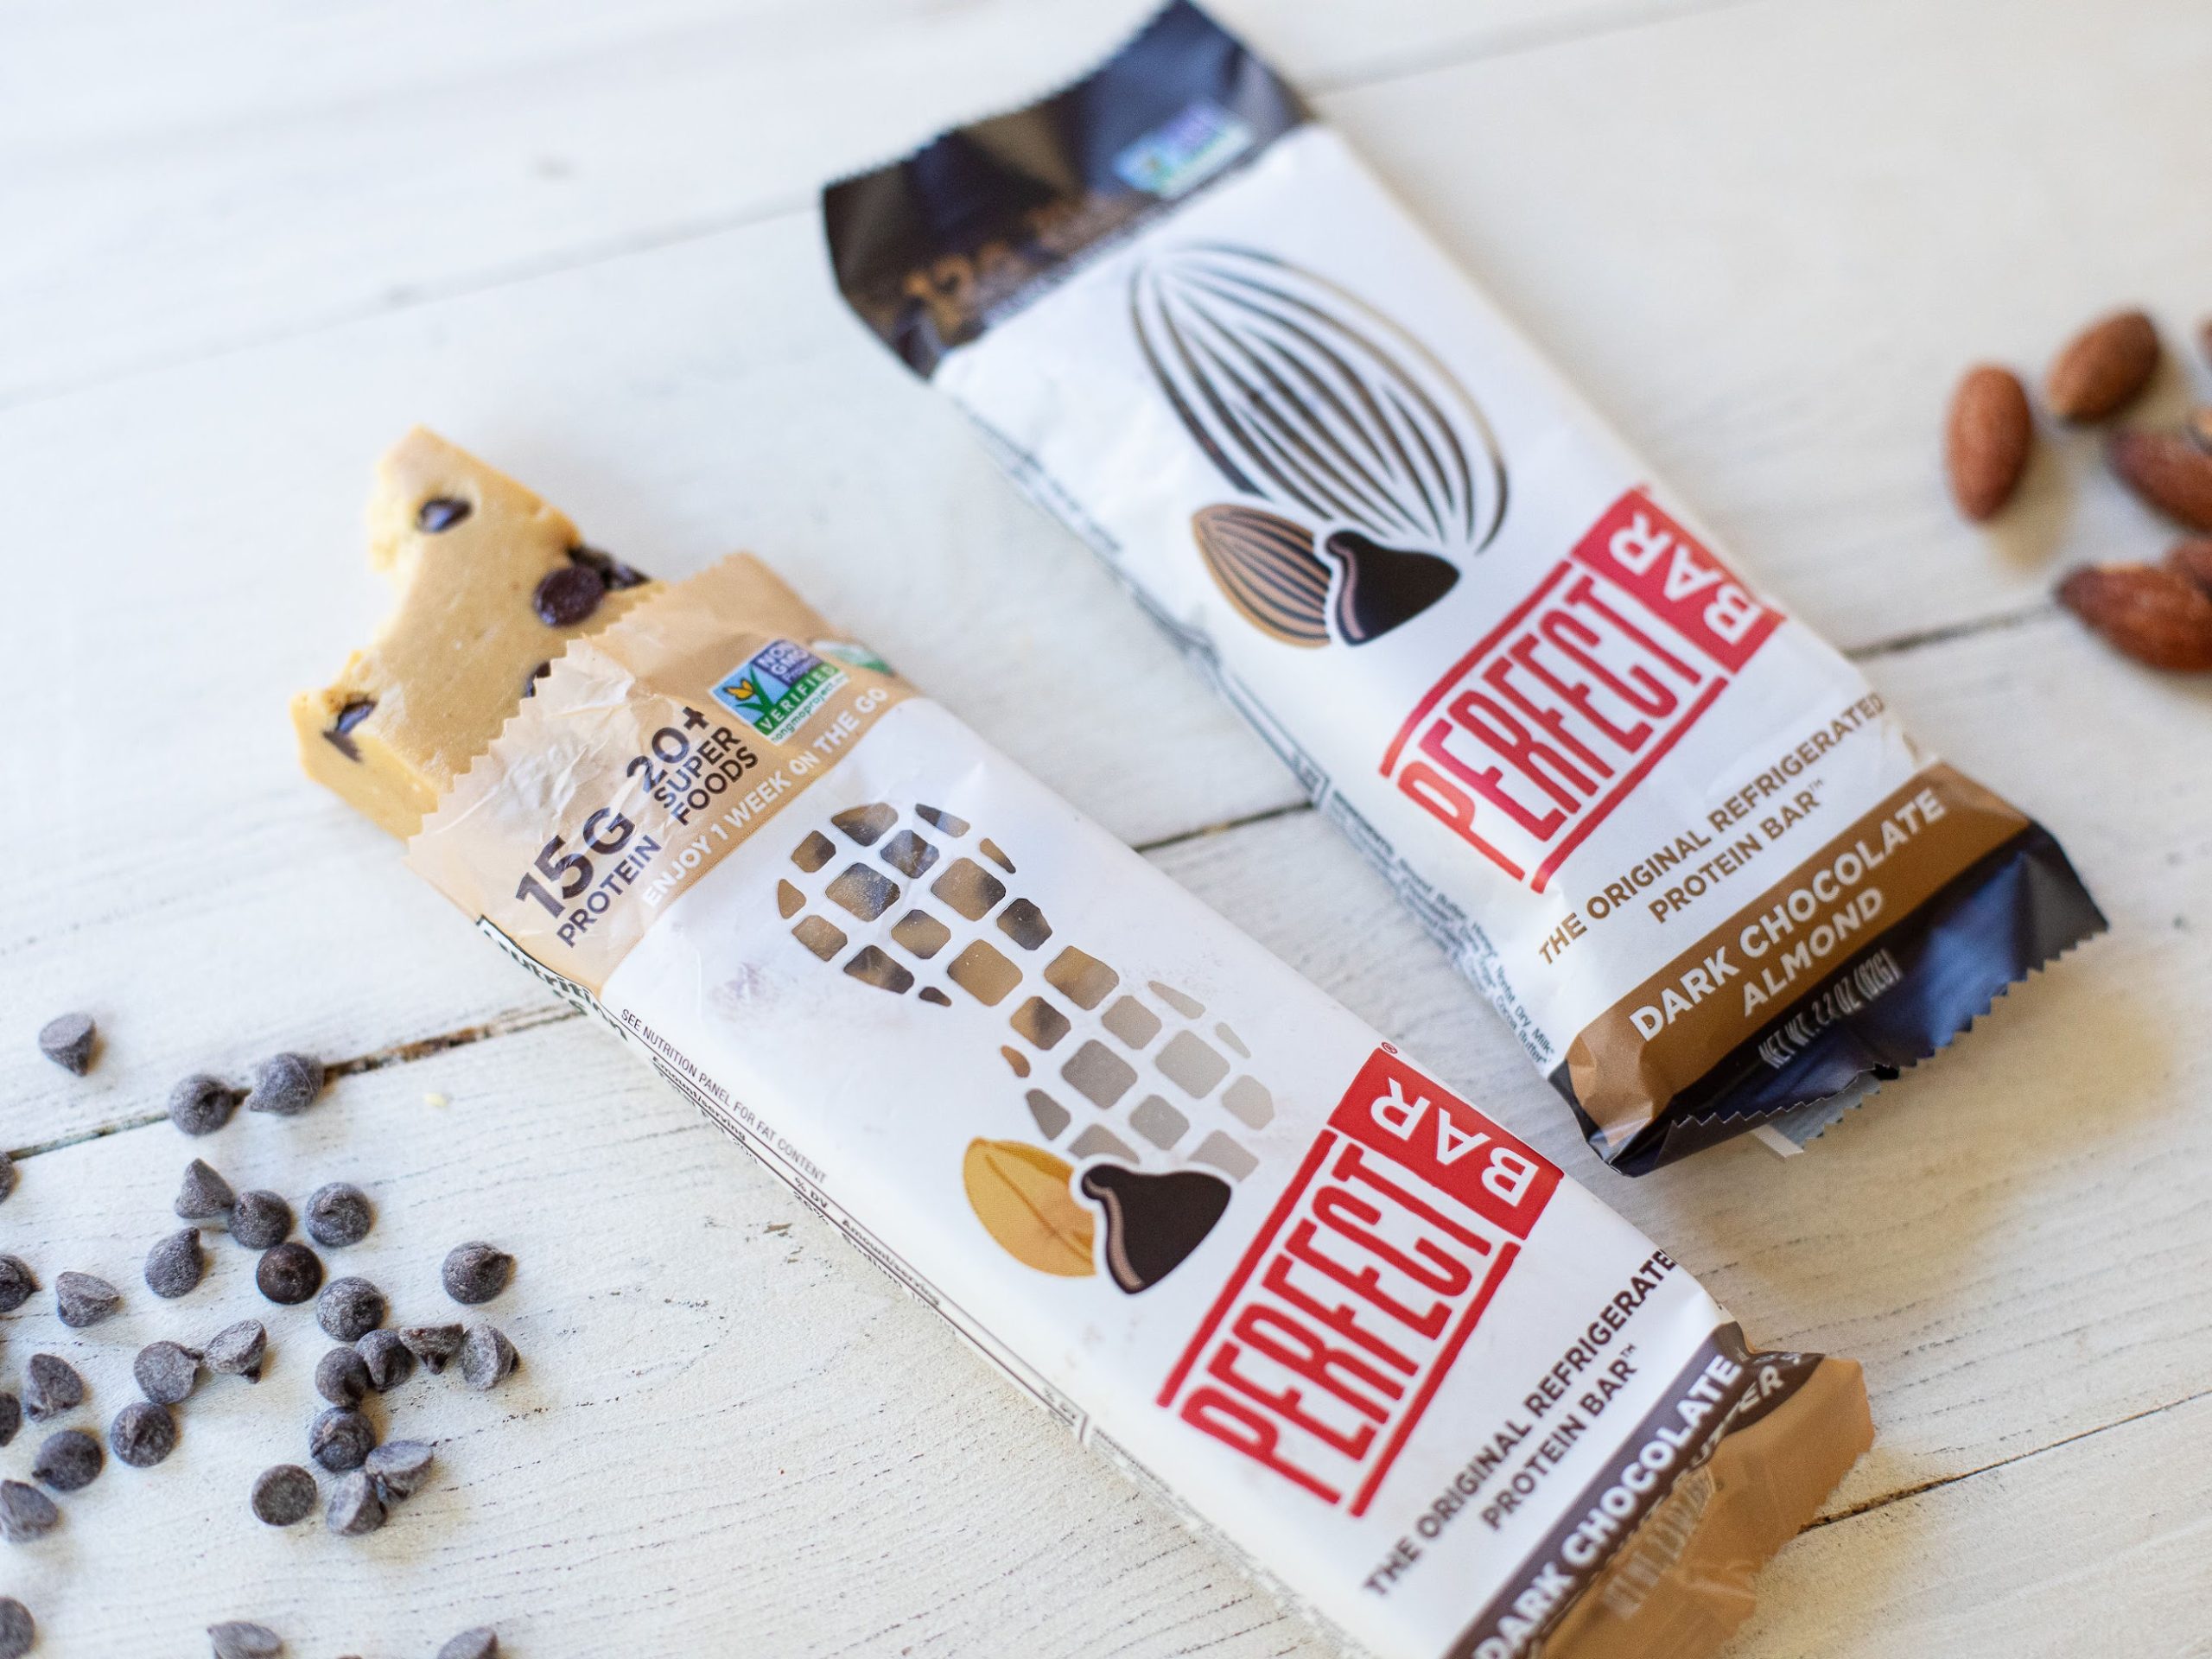 Get Your Favorite Perfect Bar For FREE At Publix